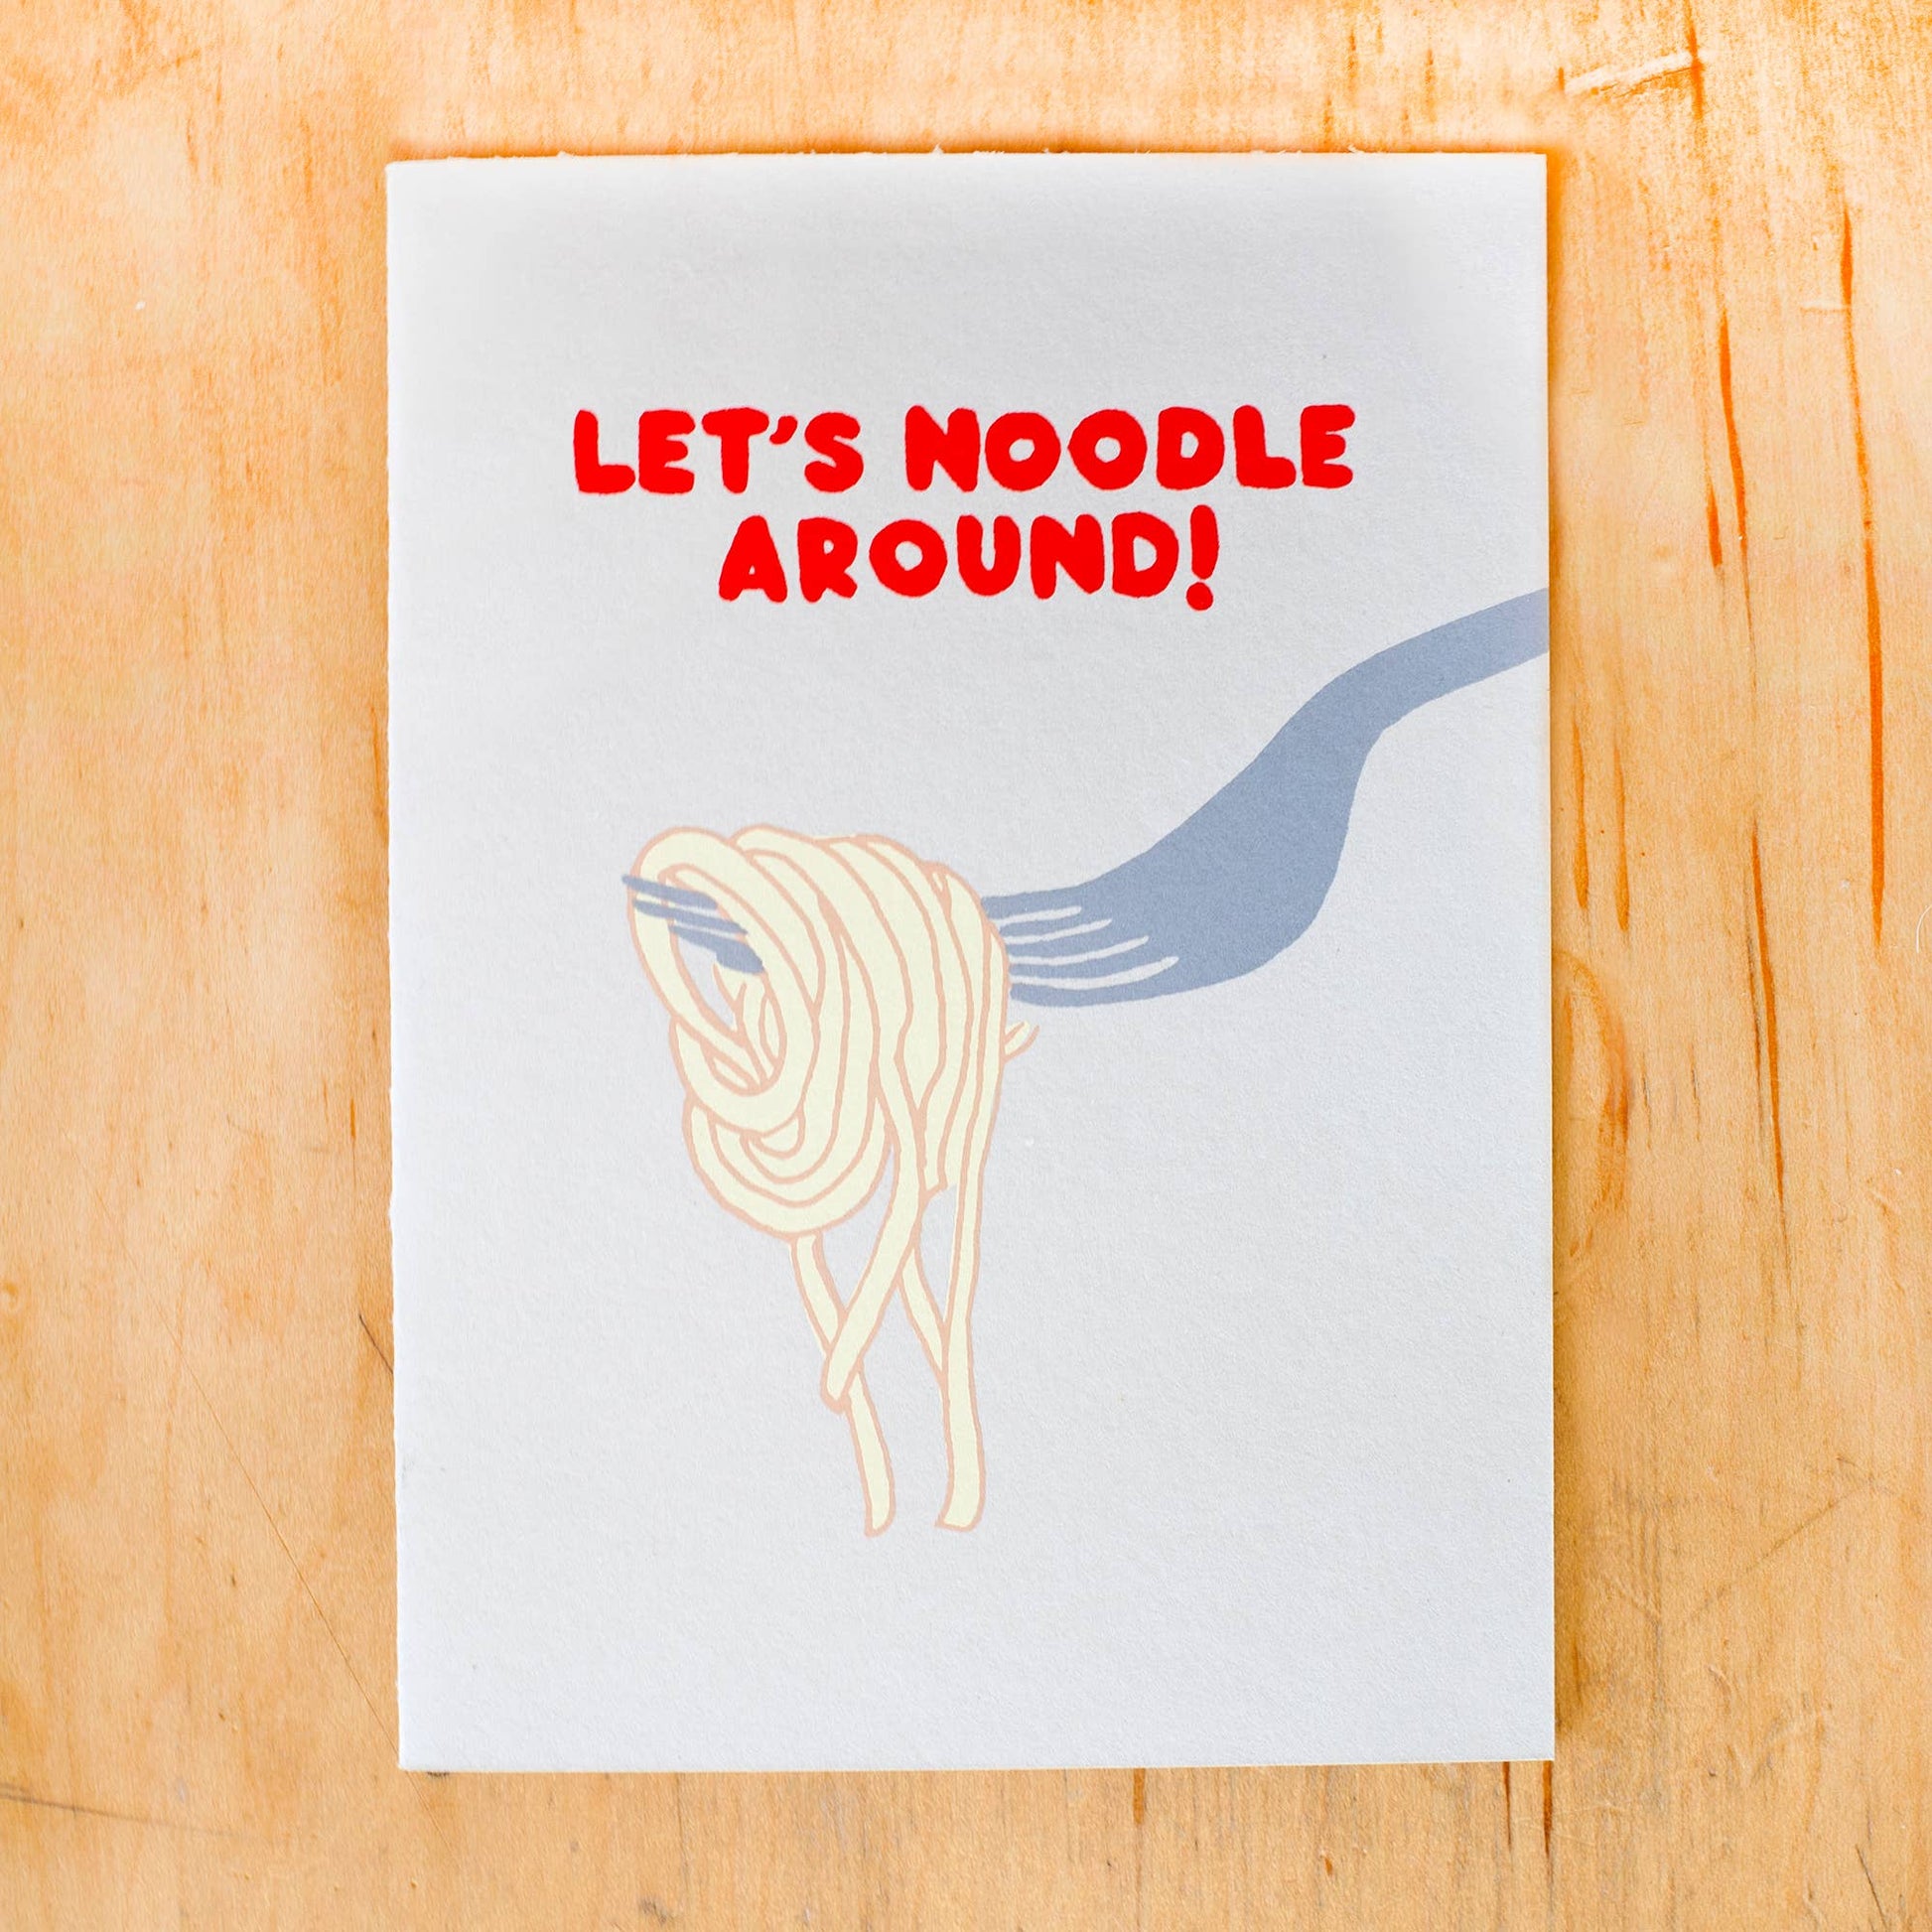 Greeting card that reads "Let's noodle around!" and has an image of a fork with noodles on it 